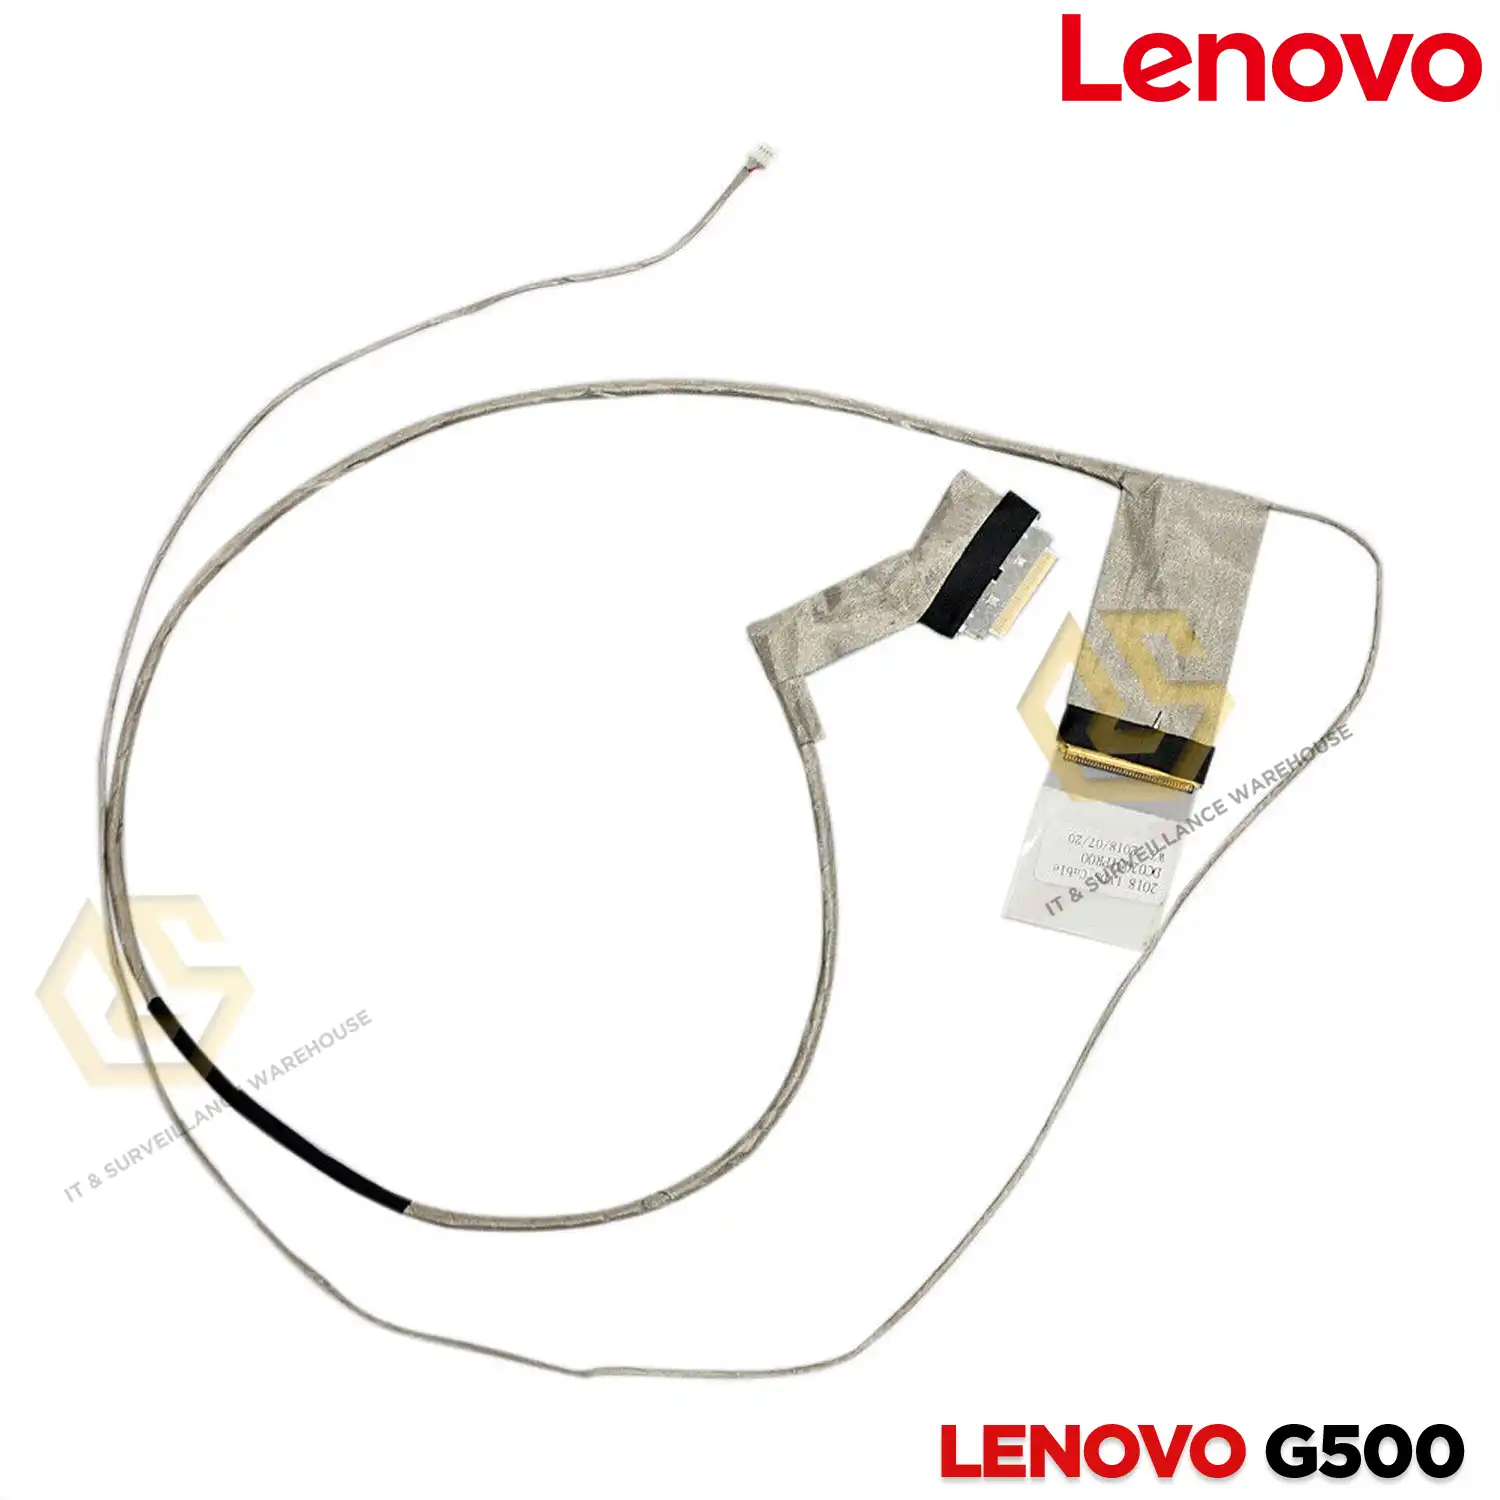 LAPTOP DISPLAY CABLE FOR LENOVO IDEAPAD G500 | G505 | G510 | G590